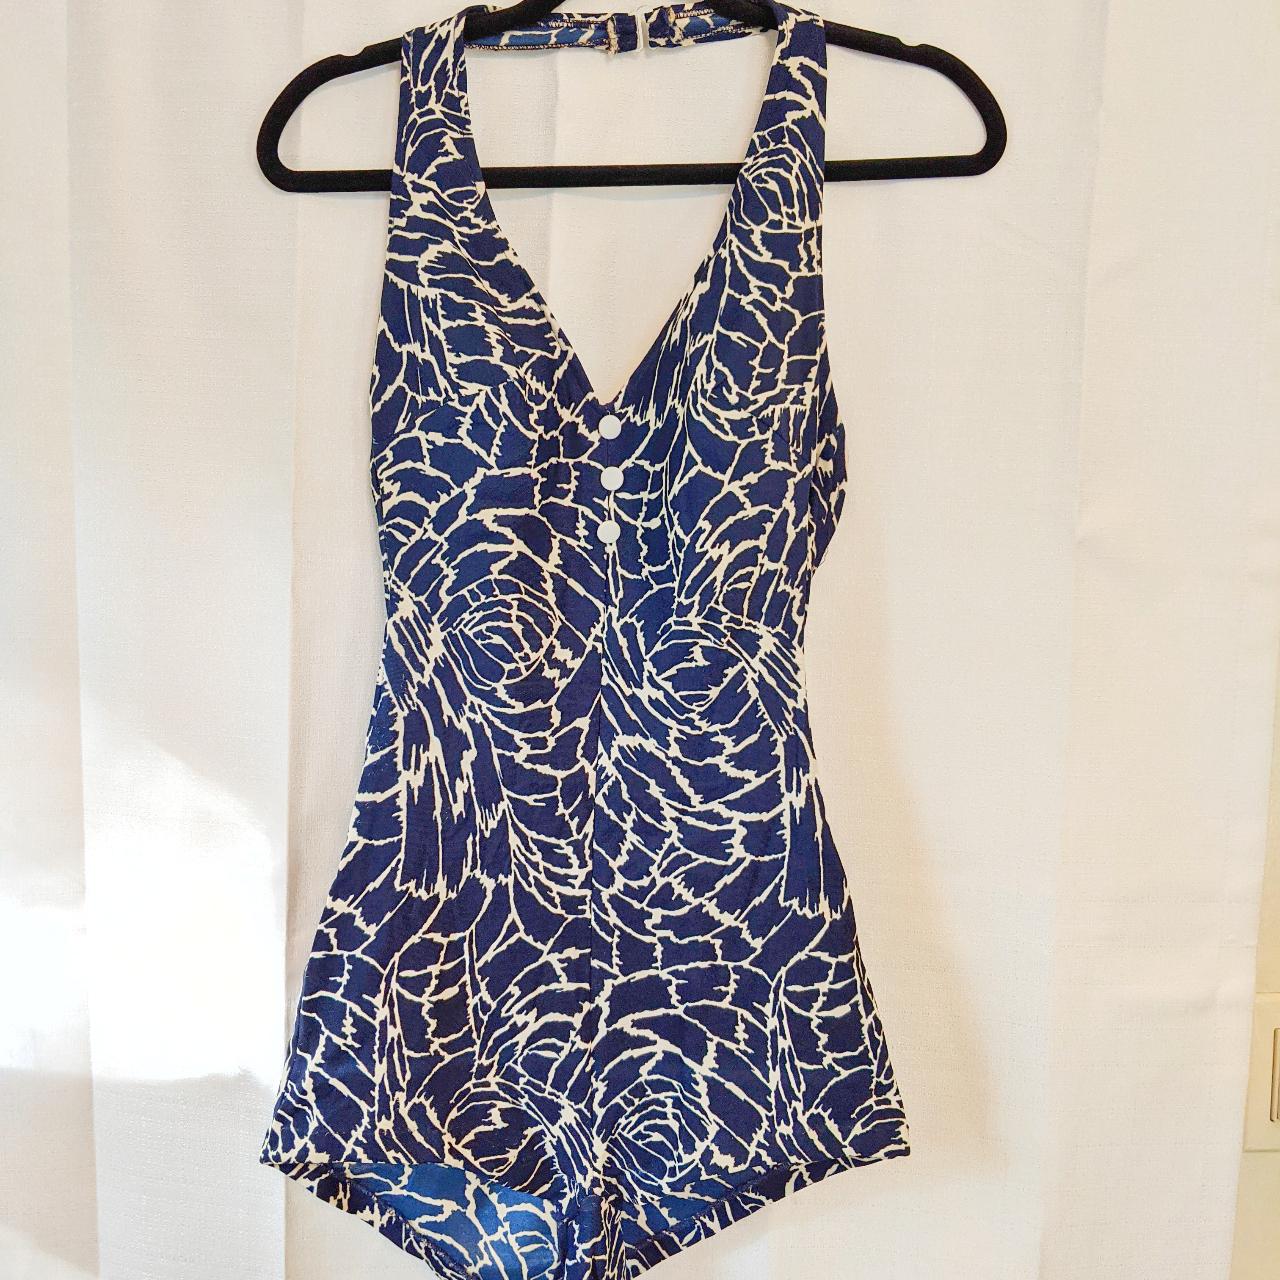 Sears Women's Blue and White Bodysuit